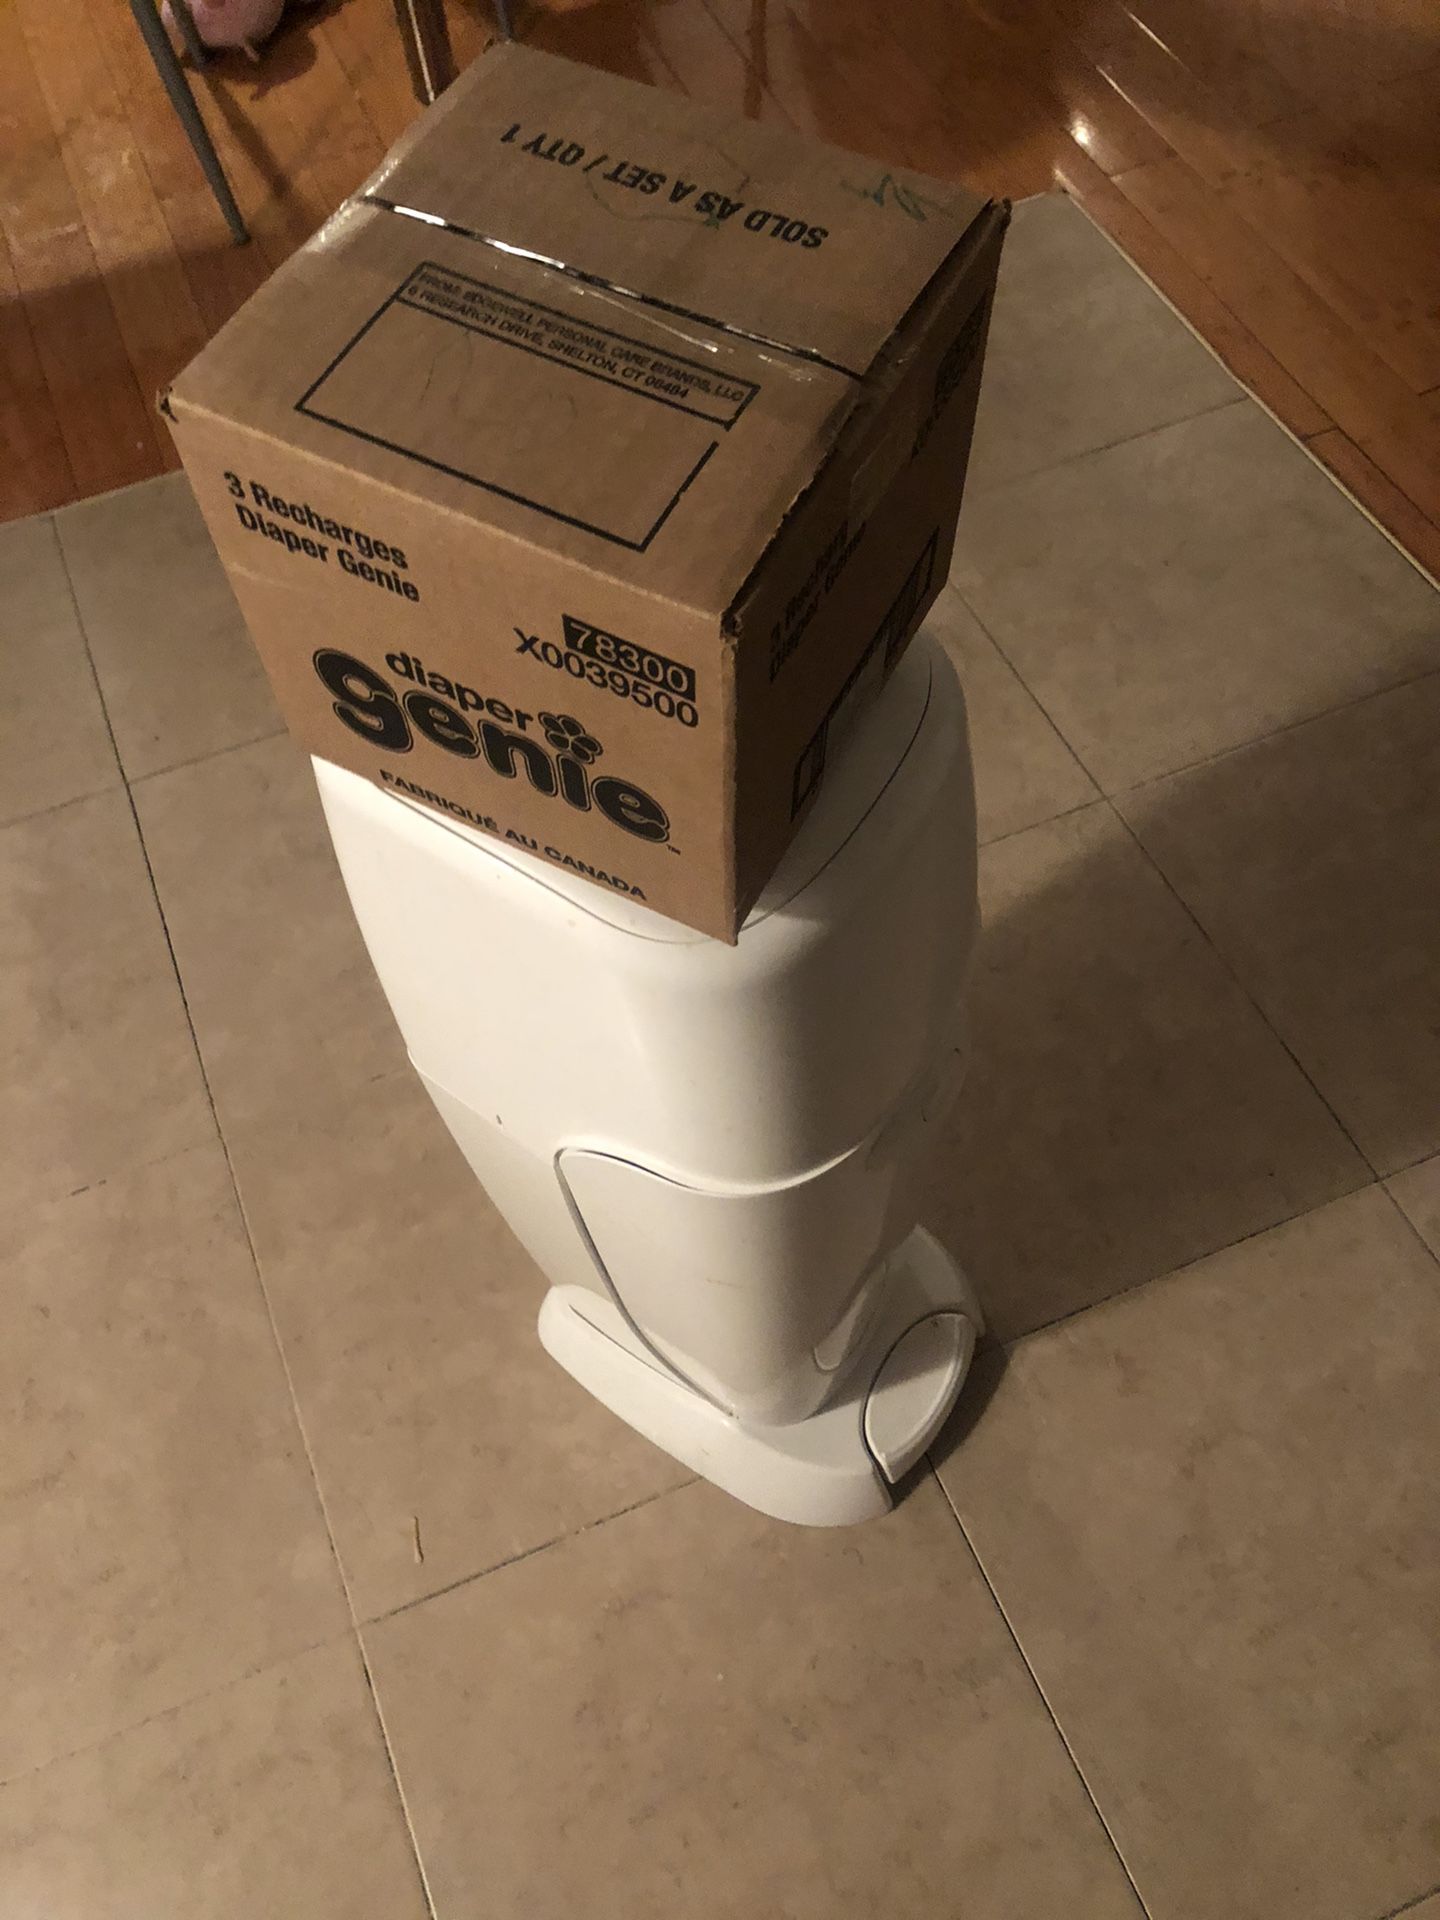 Diaper genie for $20 with a 3 pack re fill.